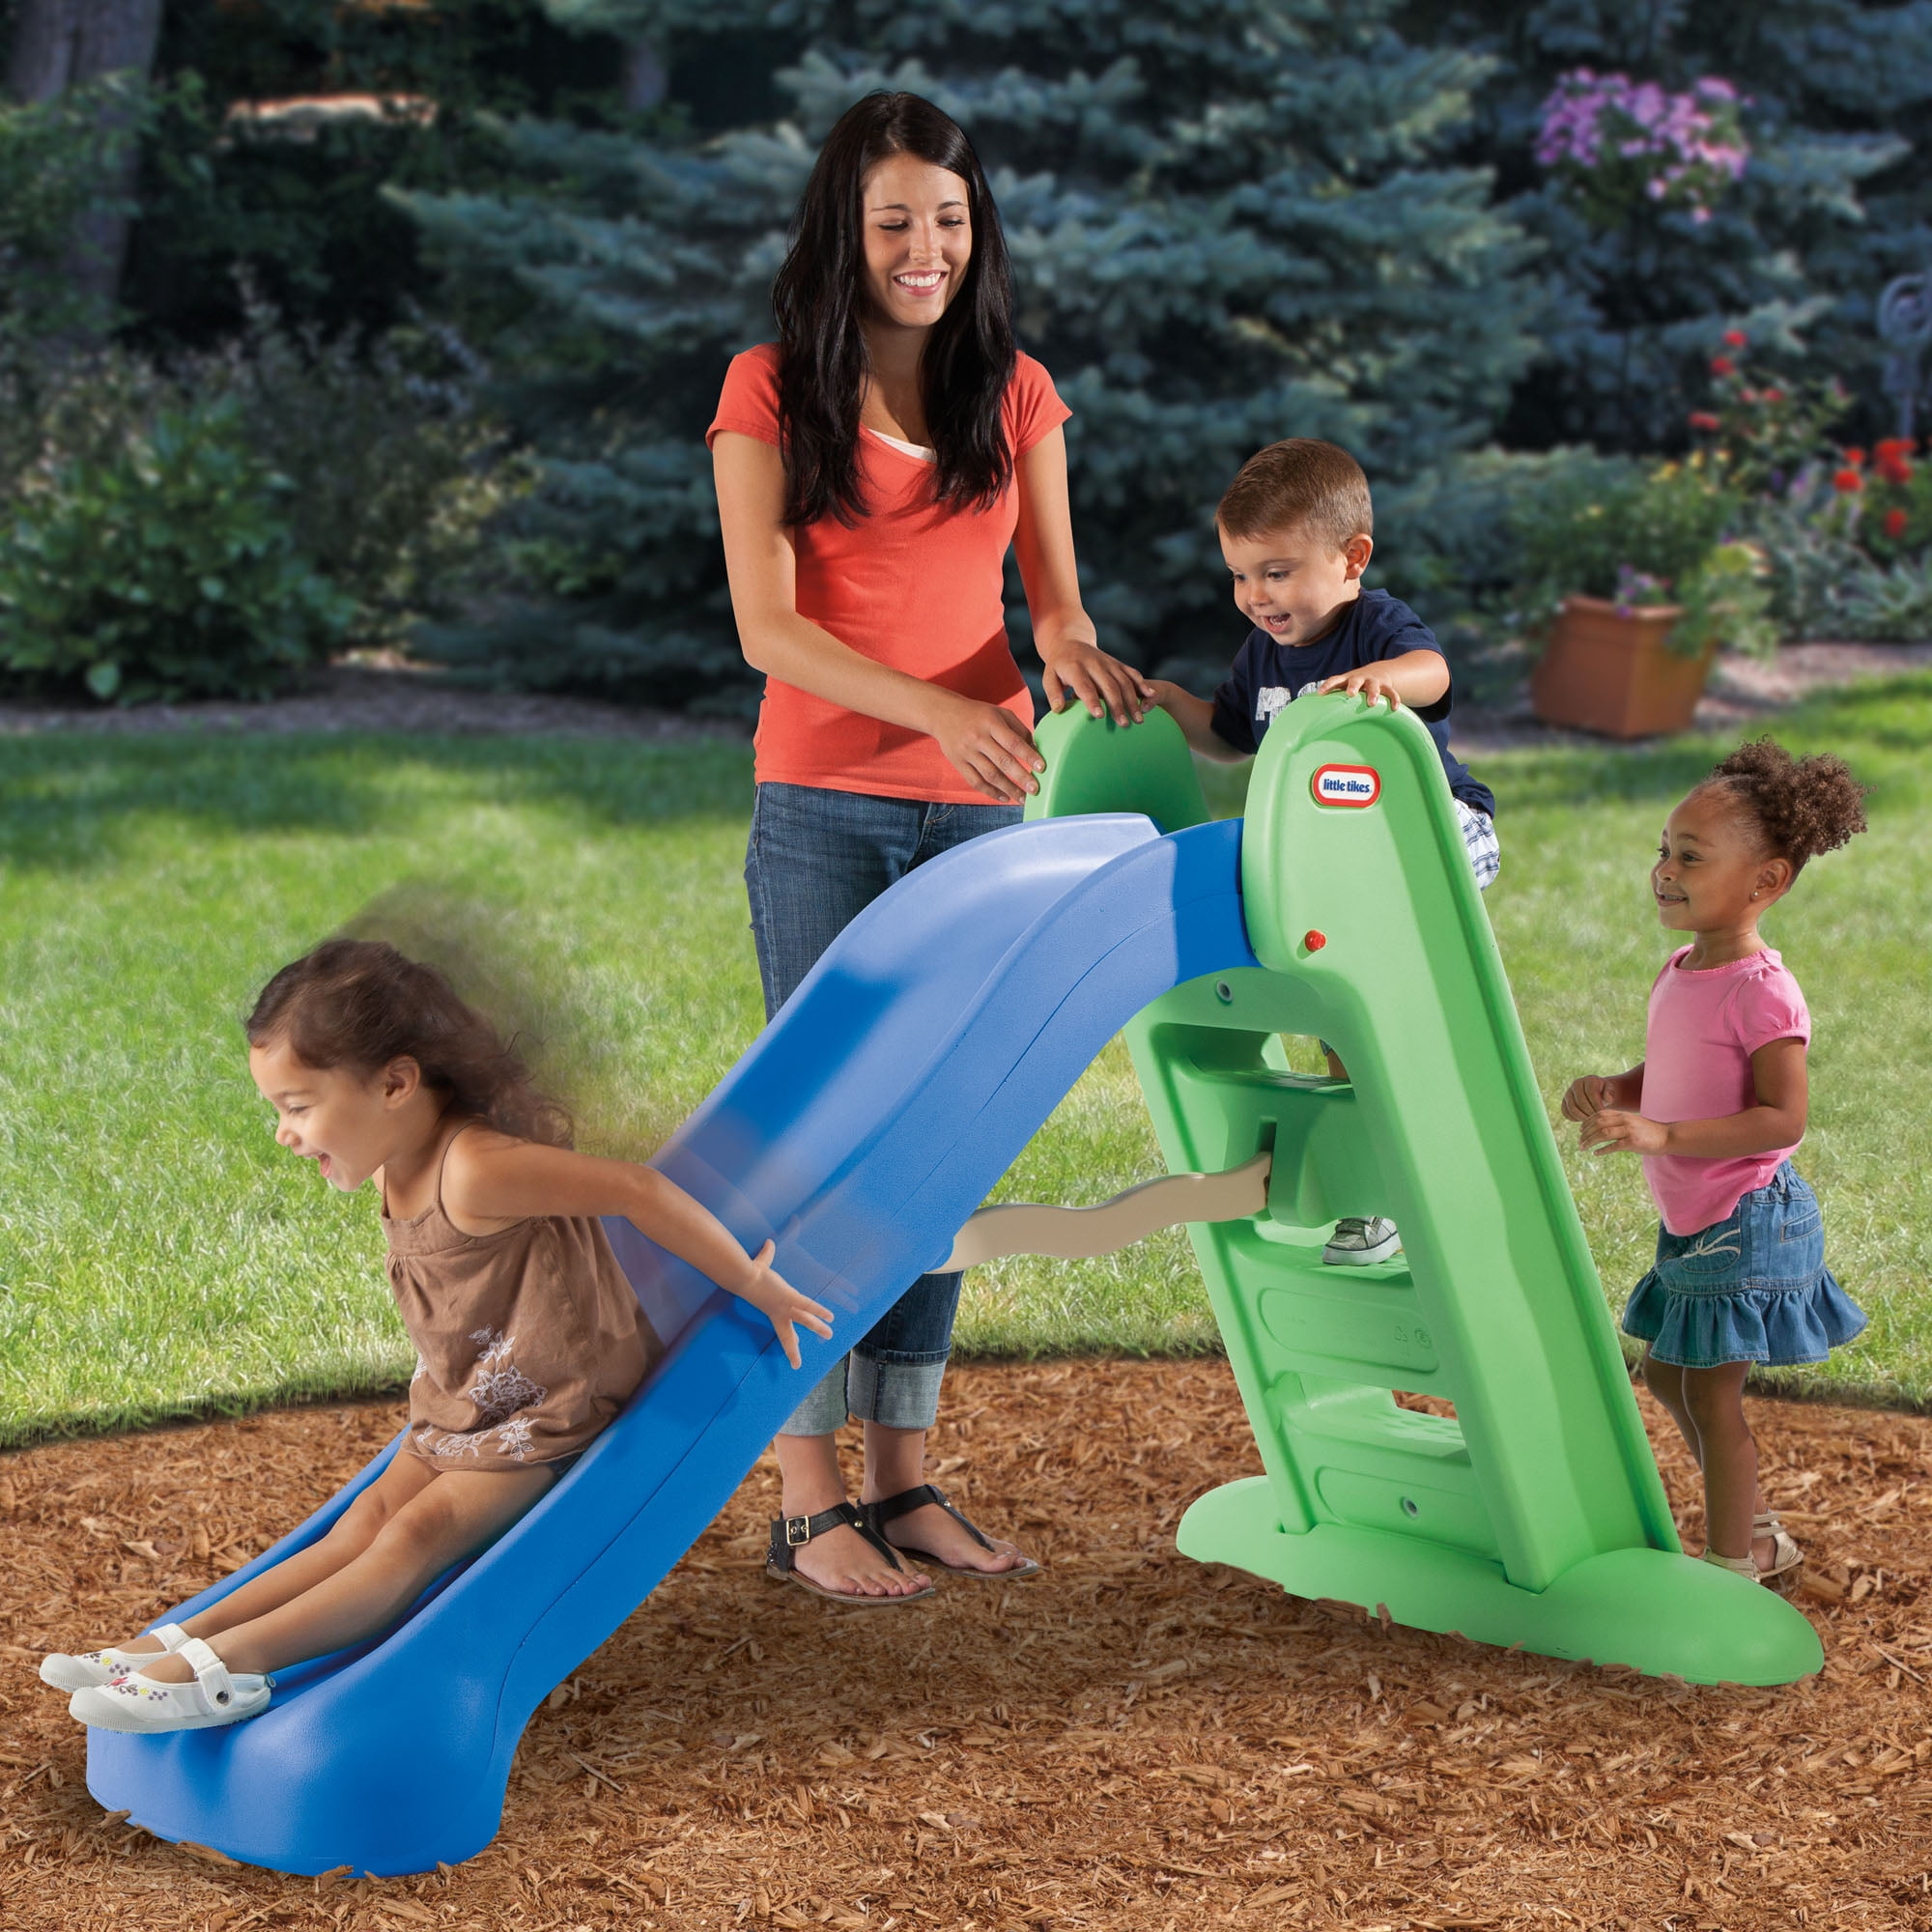 Little Tikes Easy Store Large Playground Slide with Folding for Easy Storage, Outdoor Indoor Active Play, Blue and Green- For Kids Toddlers Boys Girls Ages 2 to 6 Year old - 2